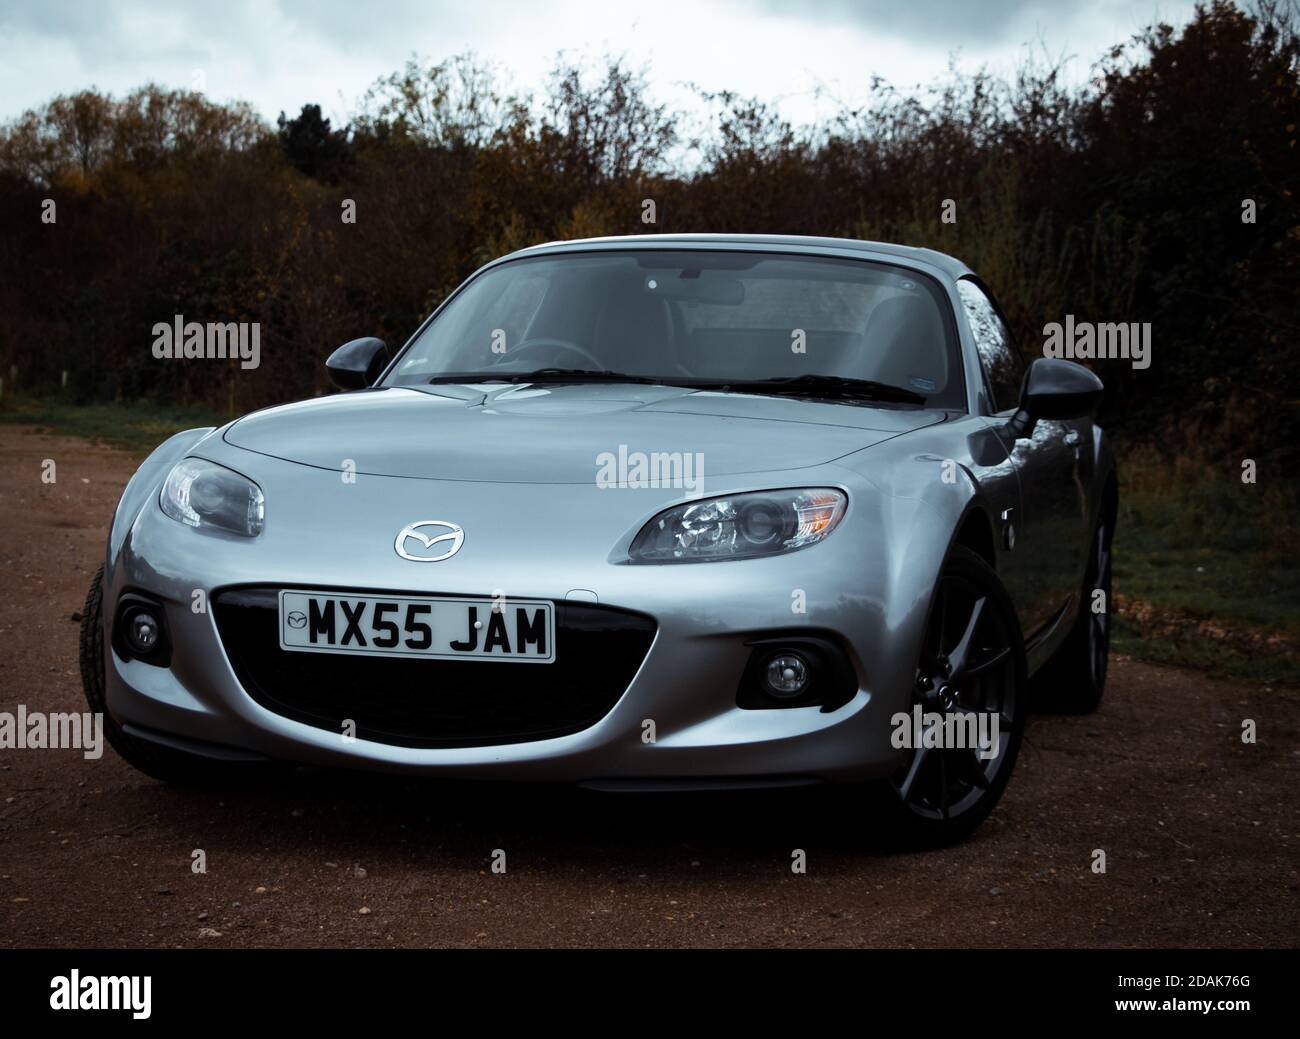 Mazda MX5 driving on the open roads Stock Photo